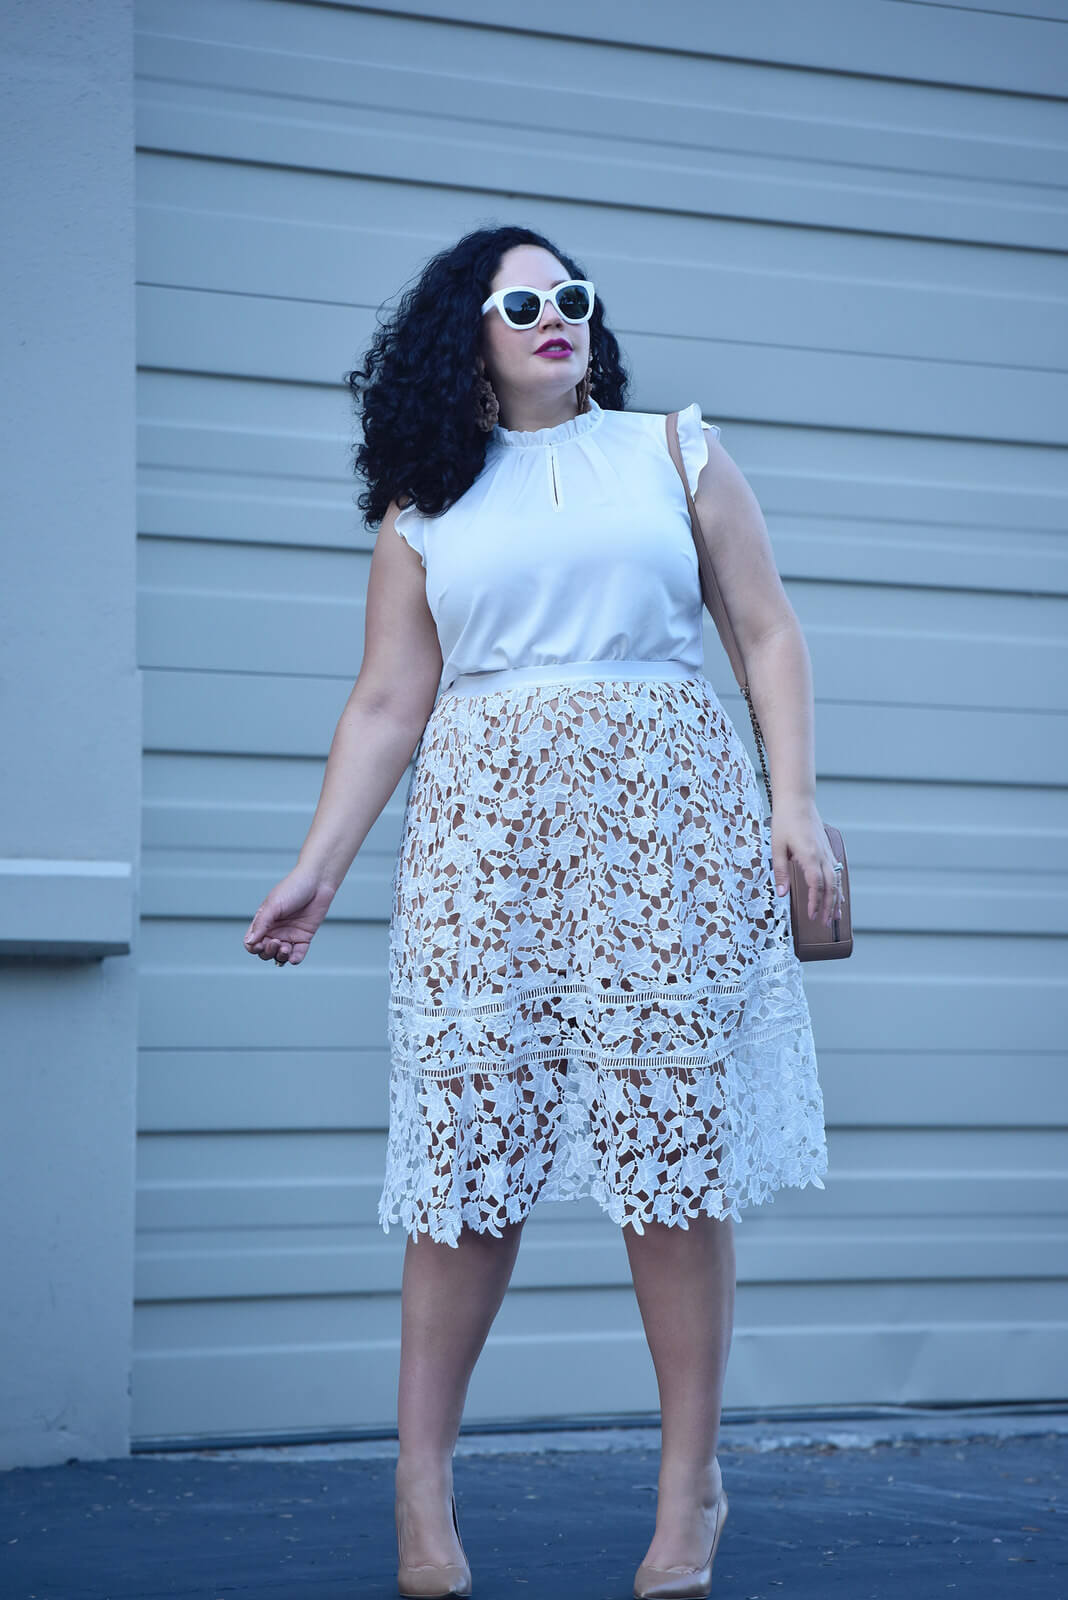 The Classy Girl’s Guide to Wearing the Nude Trend via @GirlWithCurves